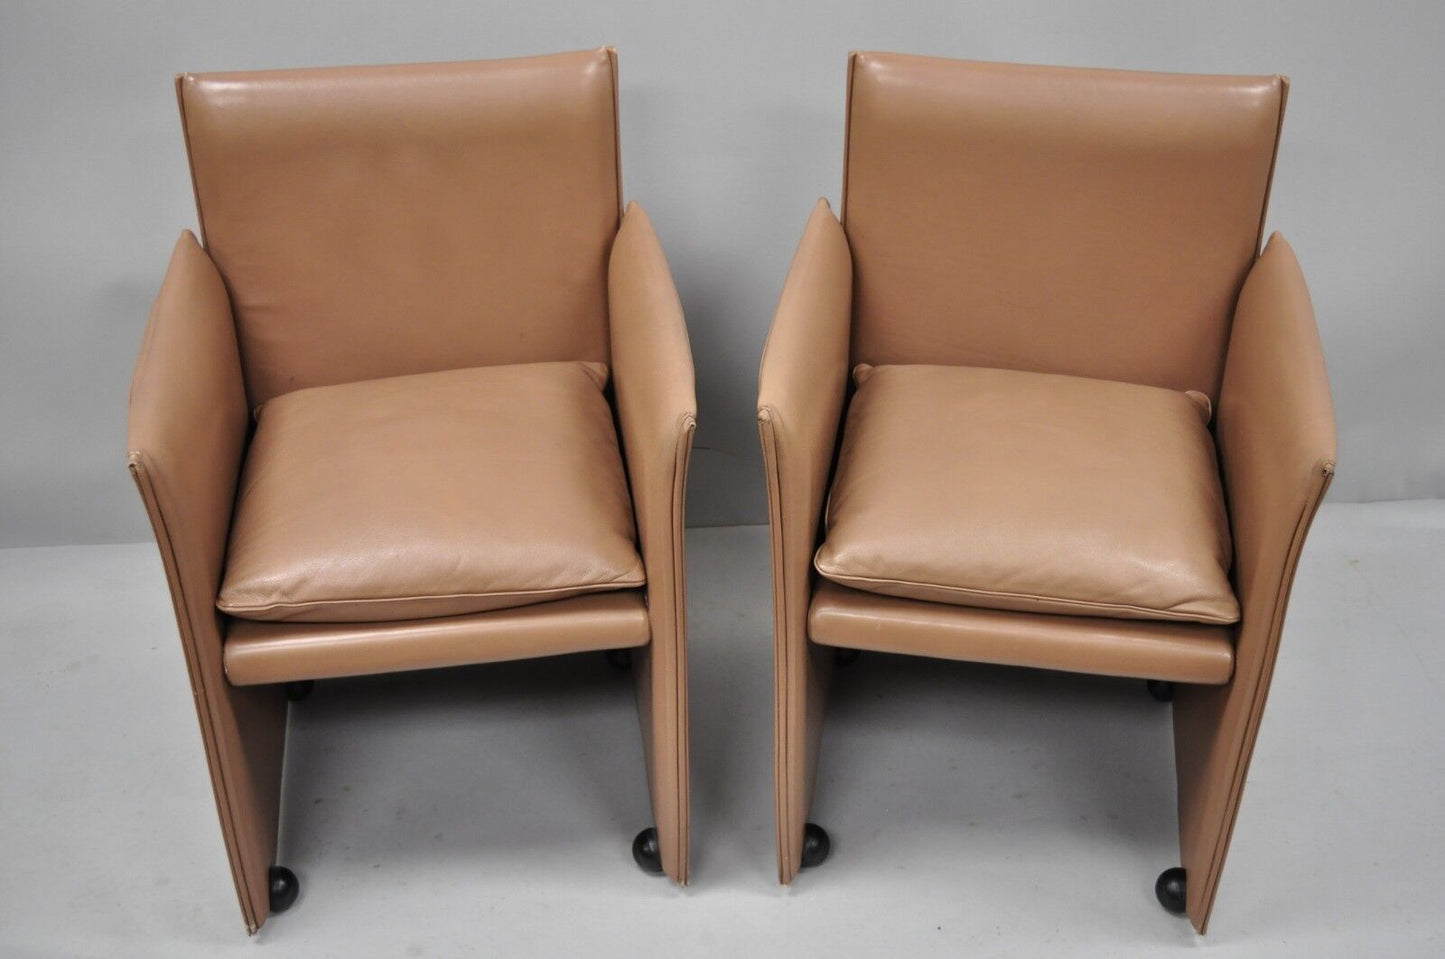 401 Break Armchair by Mario Bellini for Cassina Copper Leather 6 Dining Chairs